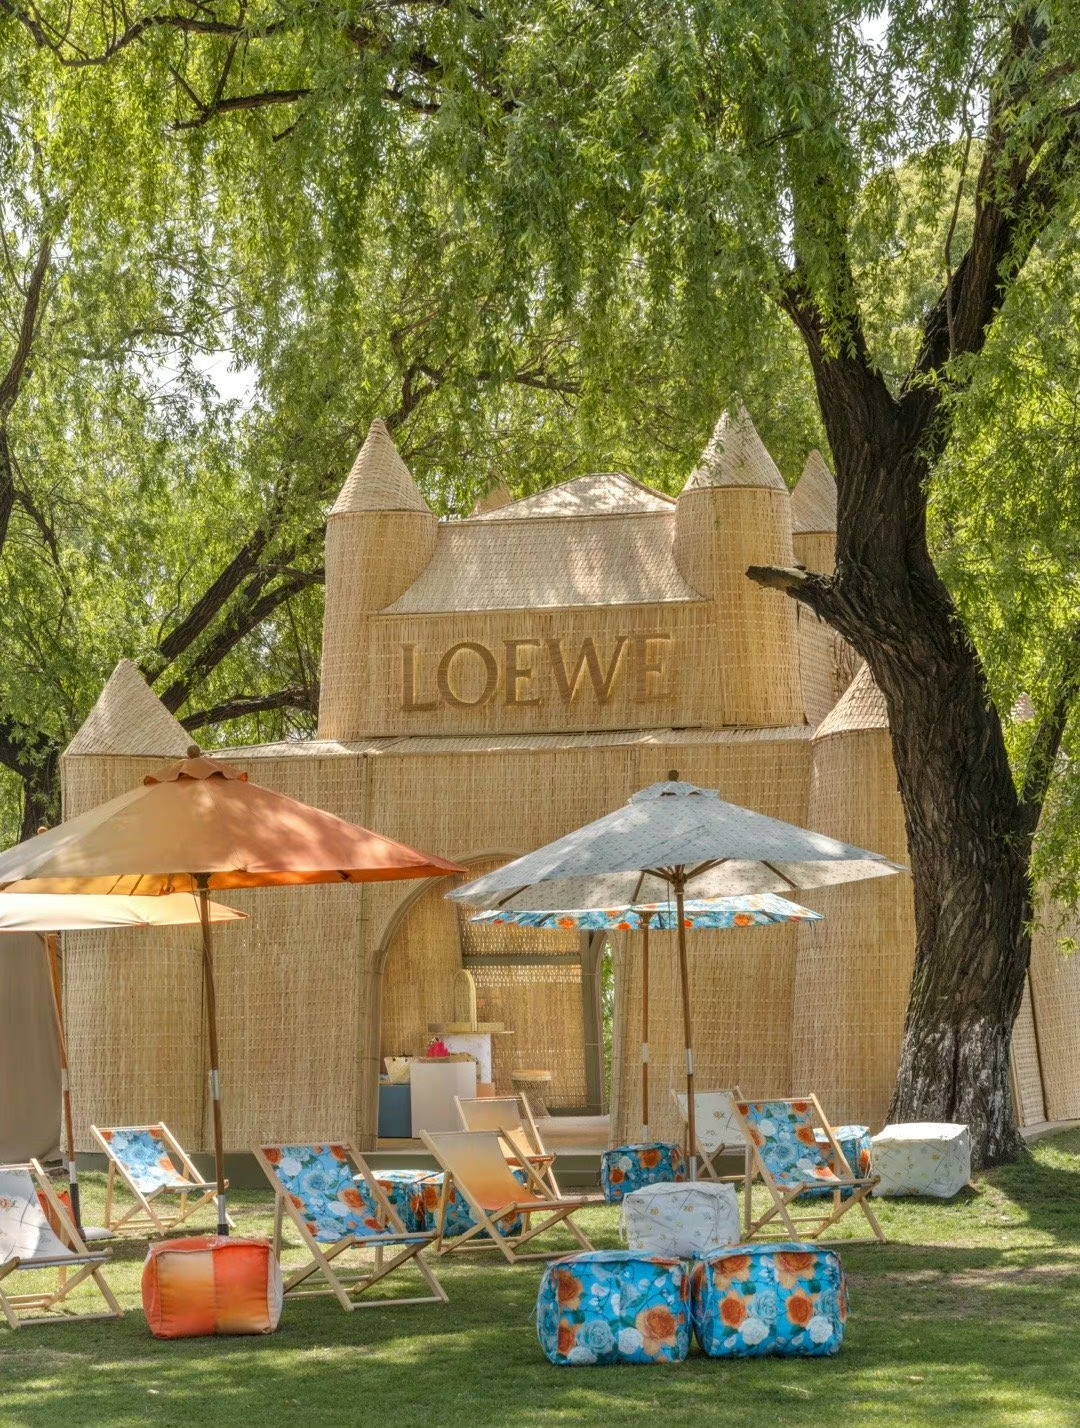 Loewe Sets The Bar For Chinese Cultural Marketing